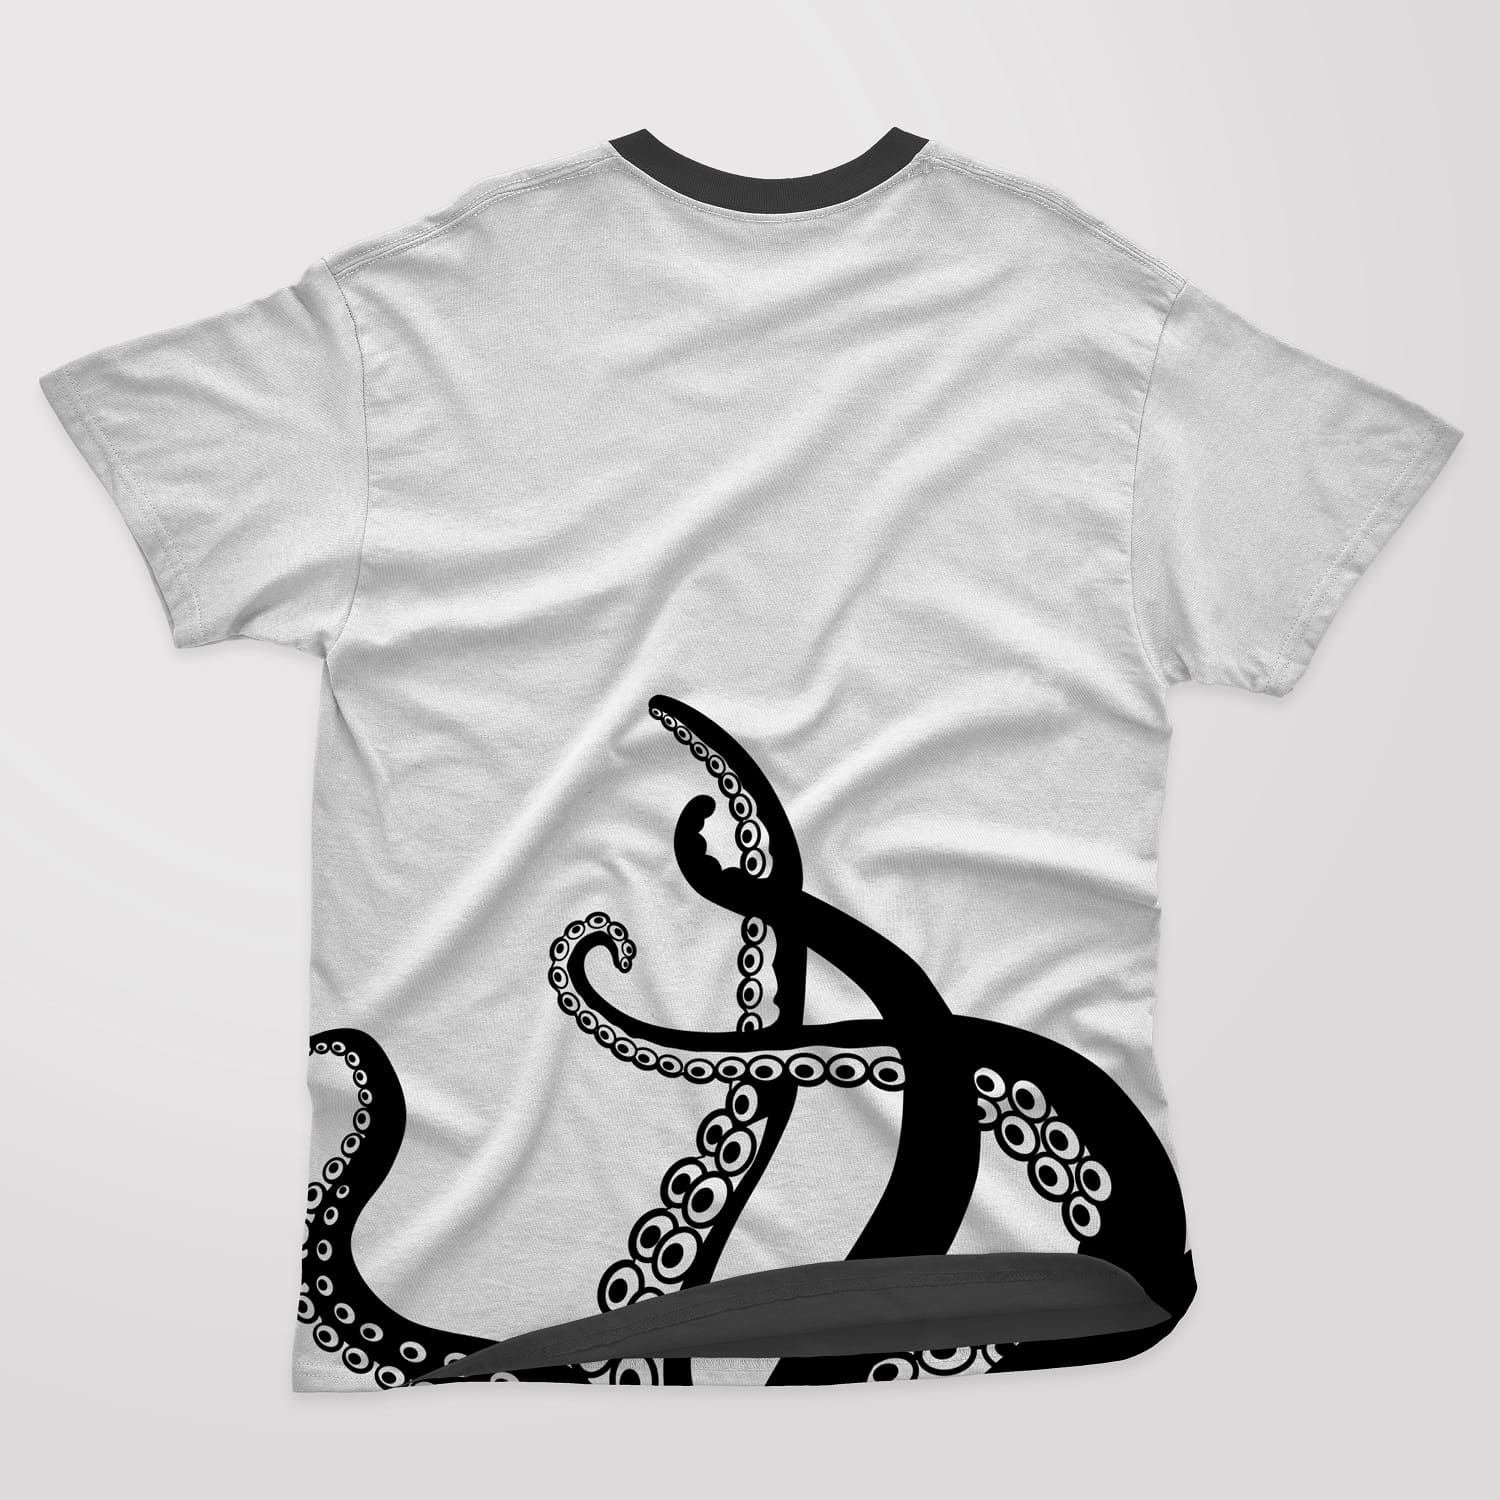 Black and white t-shirt with four octopus tentacles on a white background.